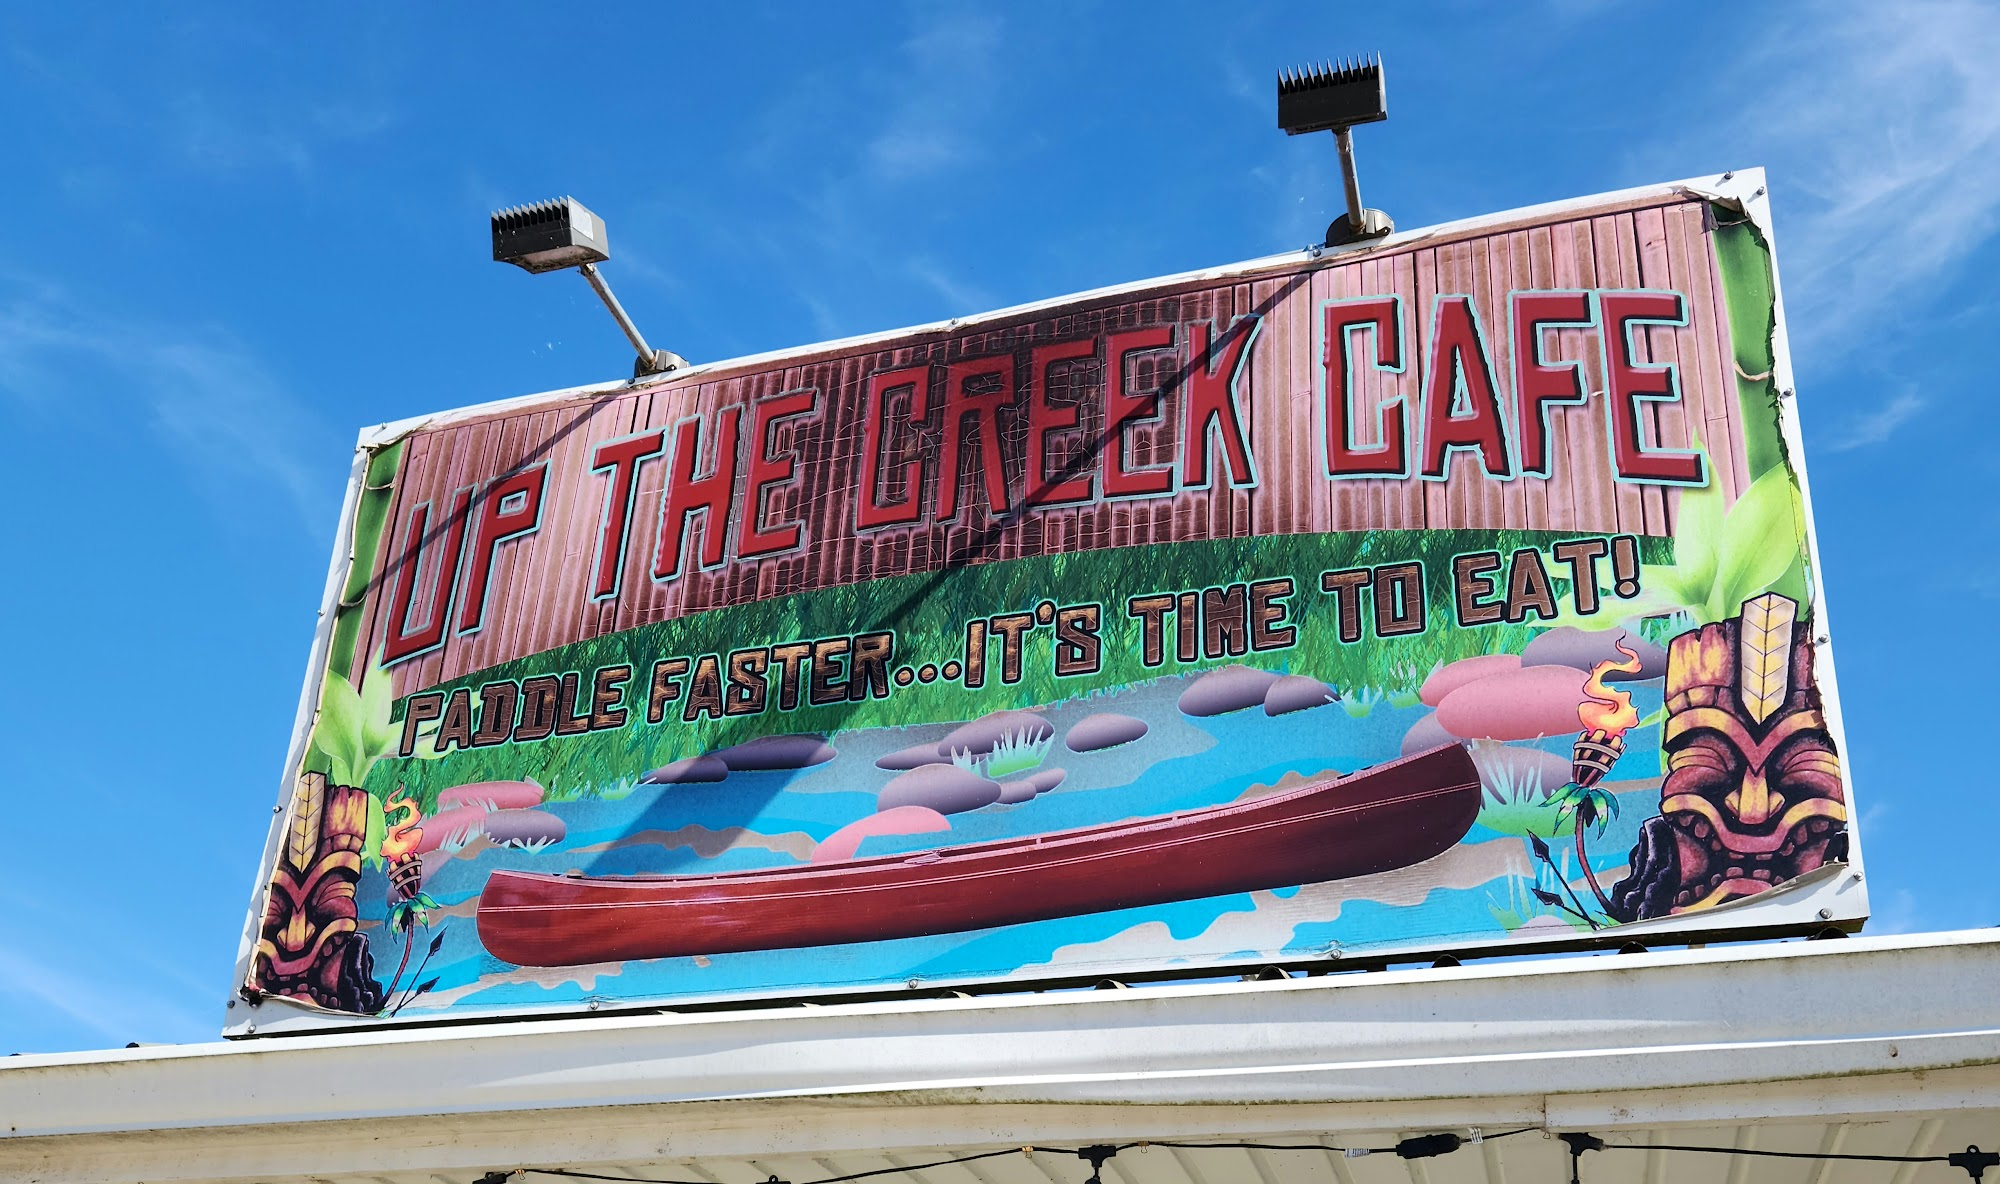 Up The Creek Cafe